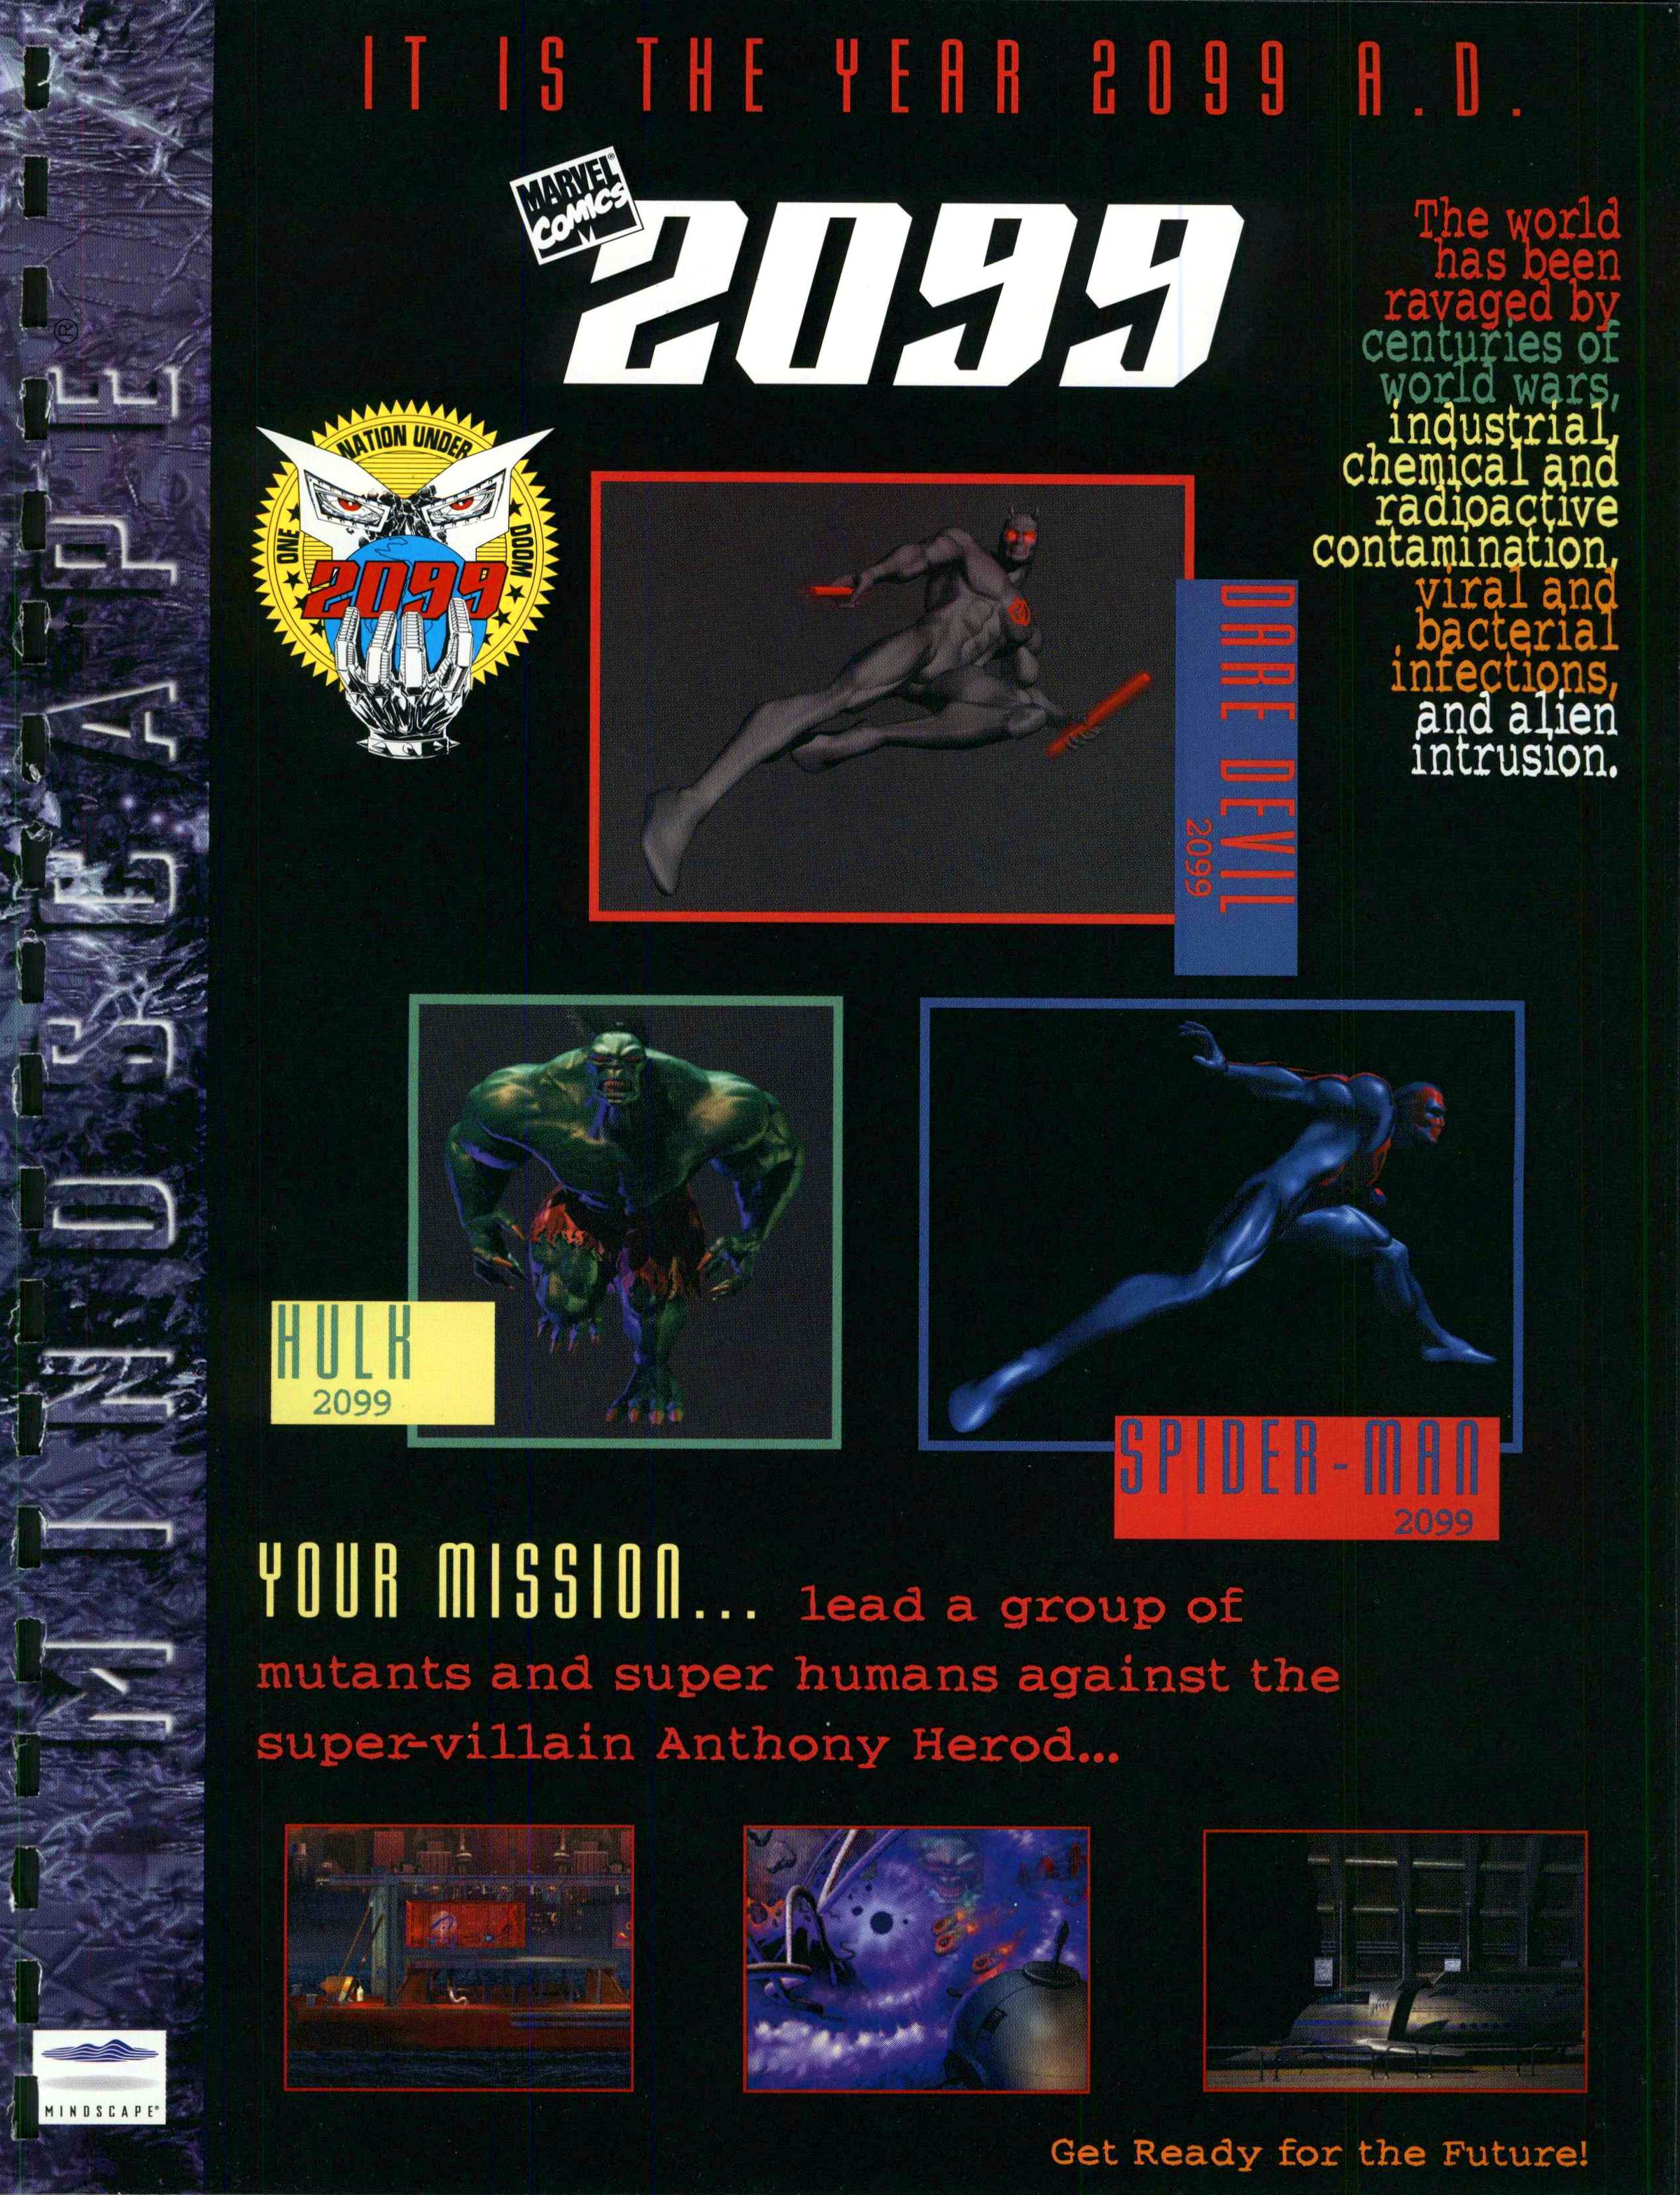 An assortment of concept art, marketing materials, and reference guides from the Video Game History Foundation’s Mark Flitman Collection